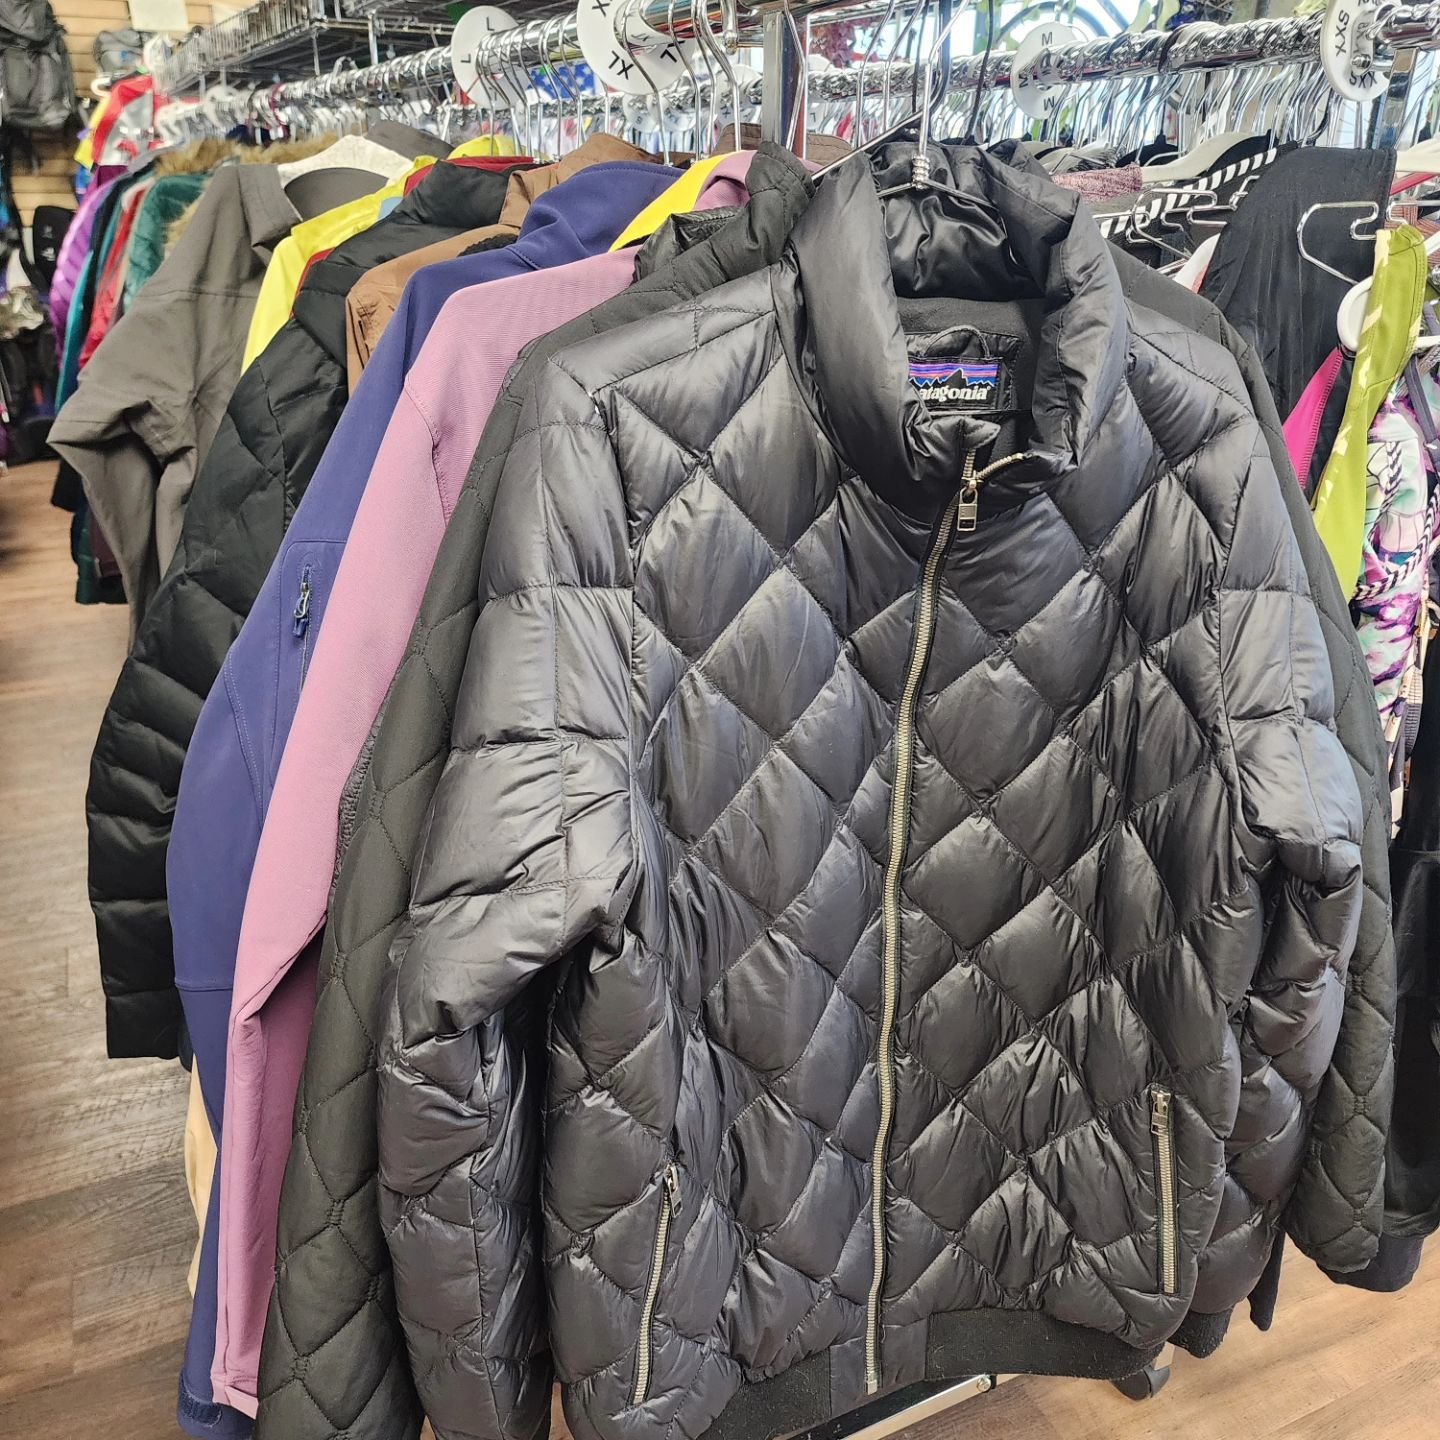 Cold? We still have great deals on winter gear to keep you warm!

.
.
.
#fortcollins #fortcollinscolorado #lovelandcolorado #windsorcolorado #noco #csu #coloradostateuniversity #consignment #smallbusiness #outdoorgear #sportinggoods #keepgeargoing #l